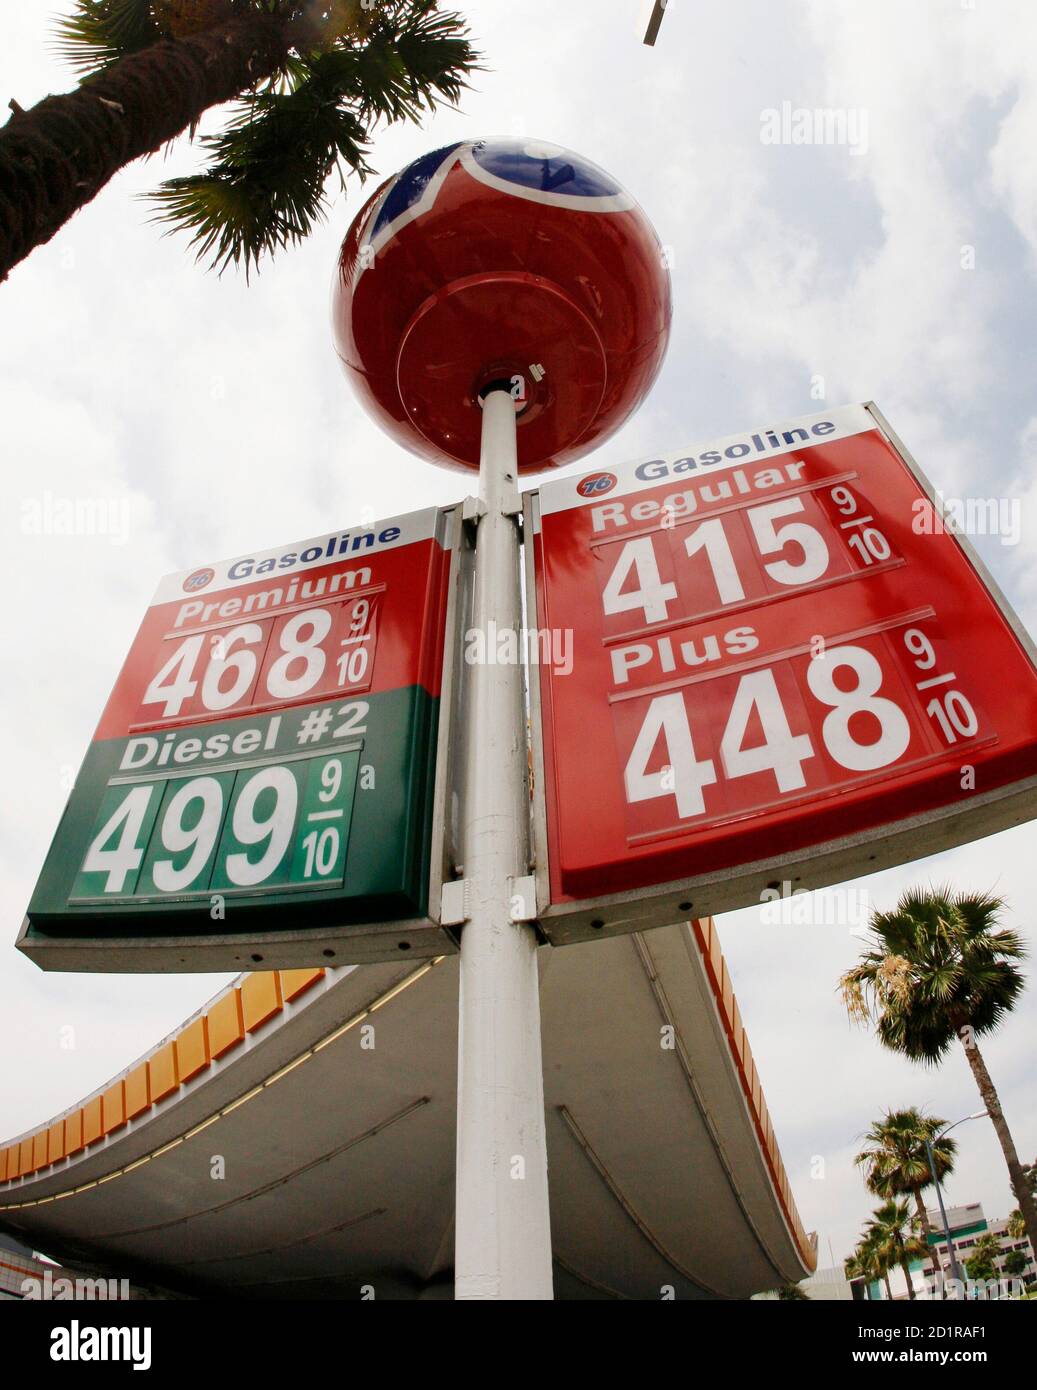 Gas prices are shown at a gas station in Beverly Hills, California May 20, 2008. Crude oil prices rose again on Tuesday, hitting record highs near $130 a barrel and sparking a gold rally for a second straight session.  REUTERS/Lucy Nicholson  (UNITED STATES)    REUTERS/Lucy Nicholson  (UNITED STATES) Stock Photo